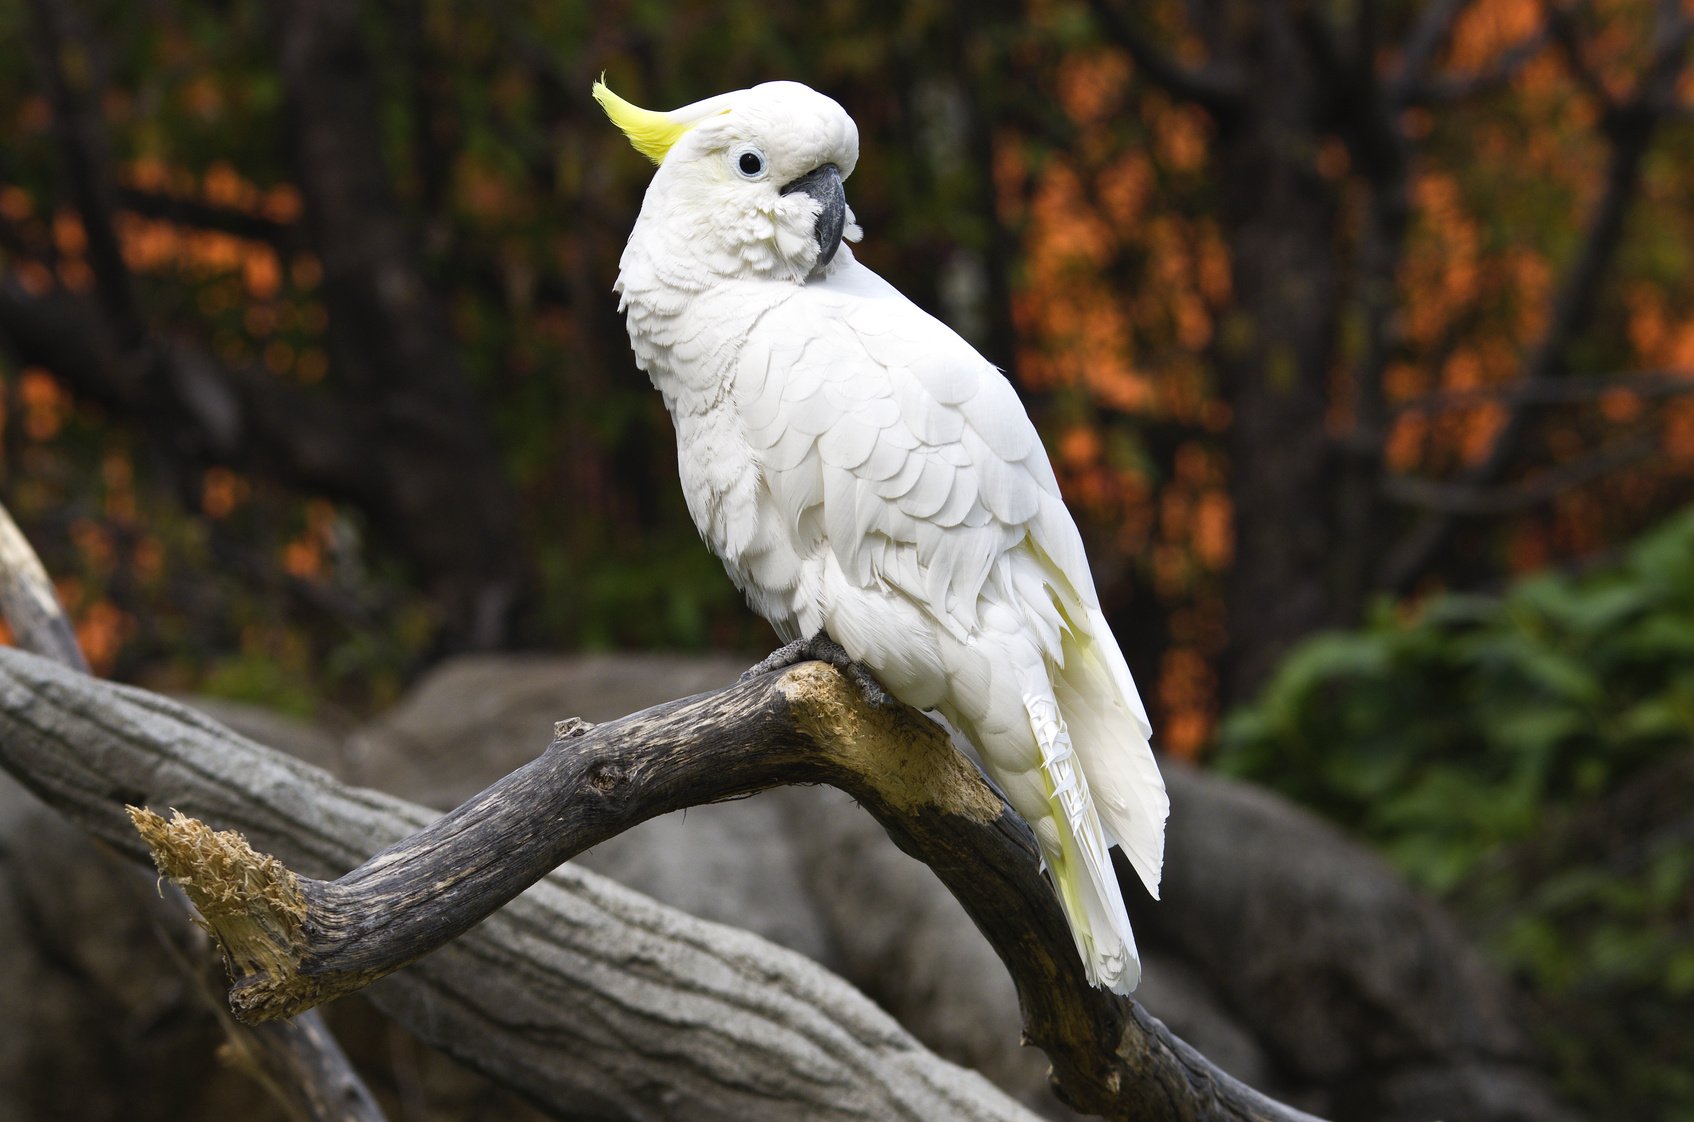 White parrot on a branch